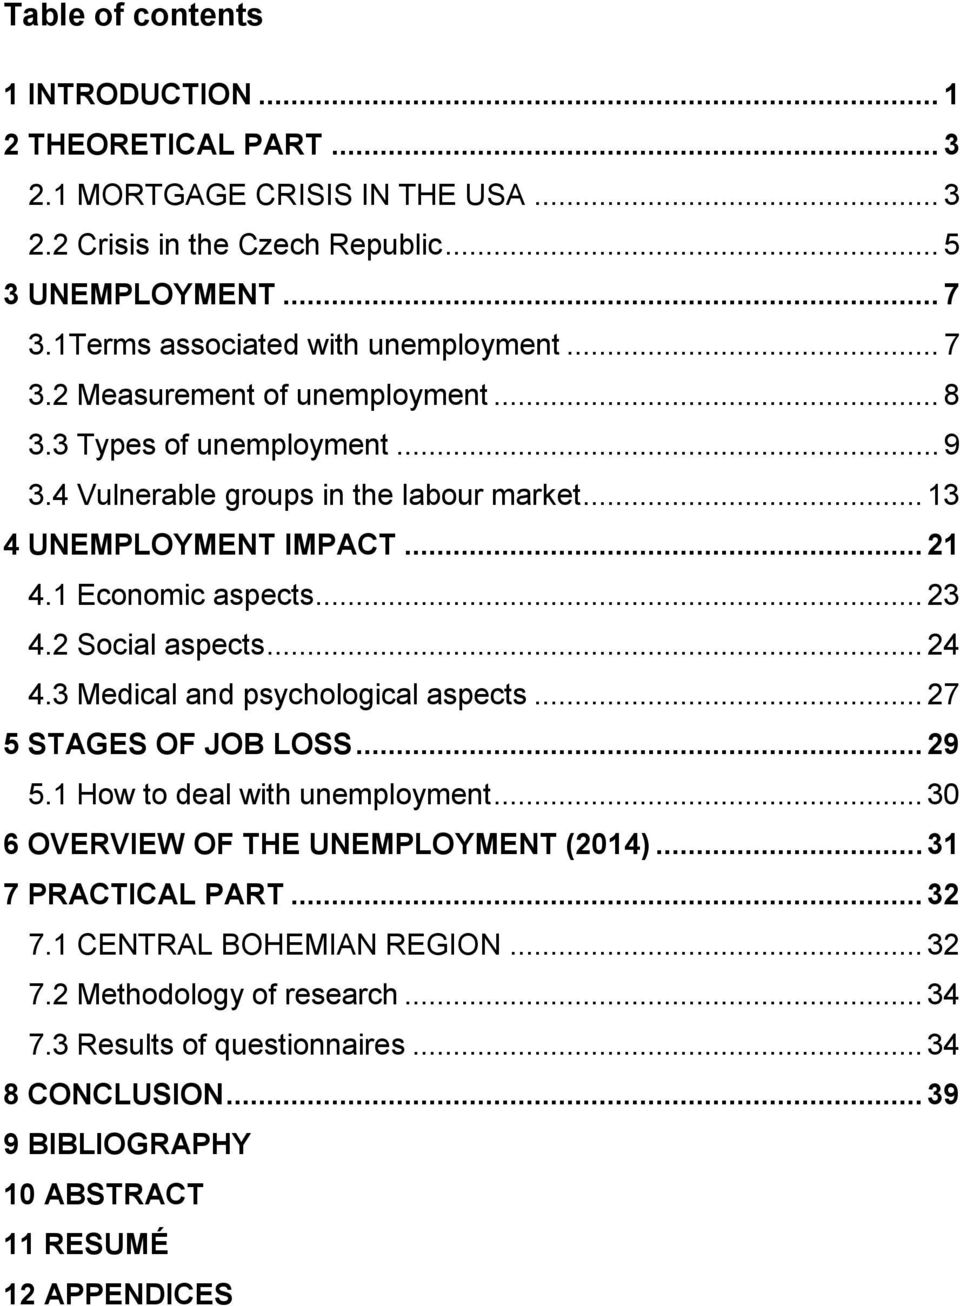 1 Economic aspects... 23 4.2 Social aspects... 24 4.3 Medical and psychological aspects... 27 5 STAGES OF JOB LOSS... 29 5.1 How to deal with unemployment.